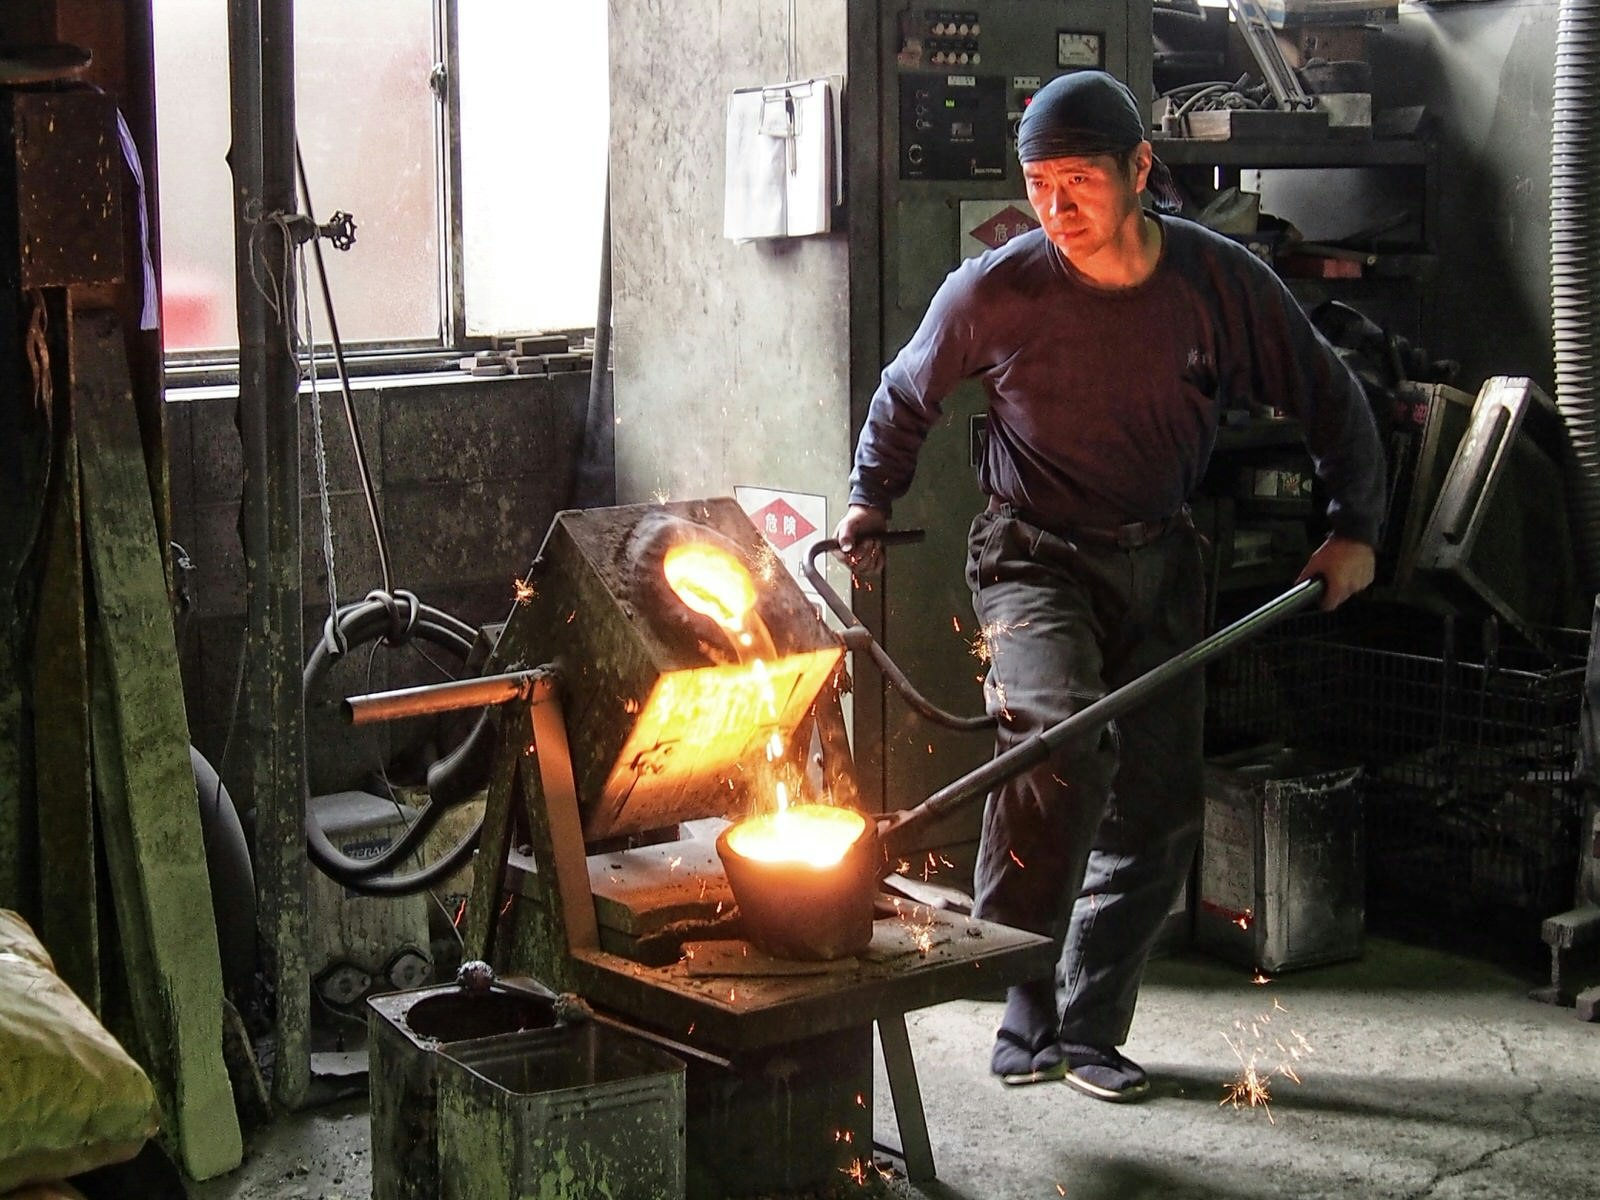 An ironware worker pours molten iron into a mold in the Iwachu workshop © Manami Okazaki / Lonely Planet